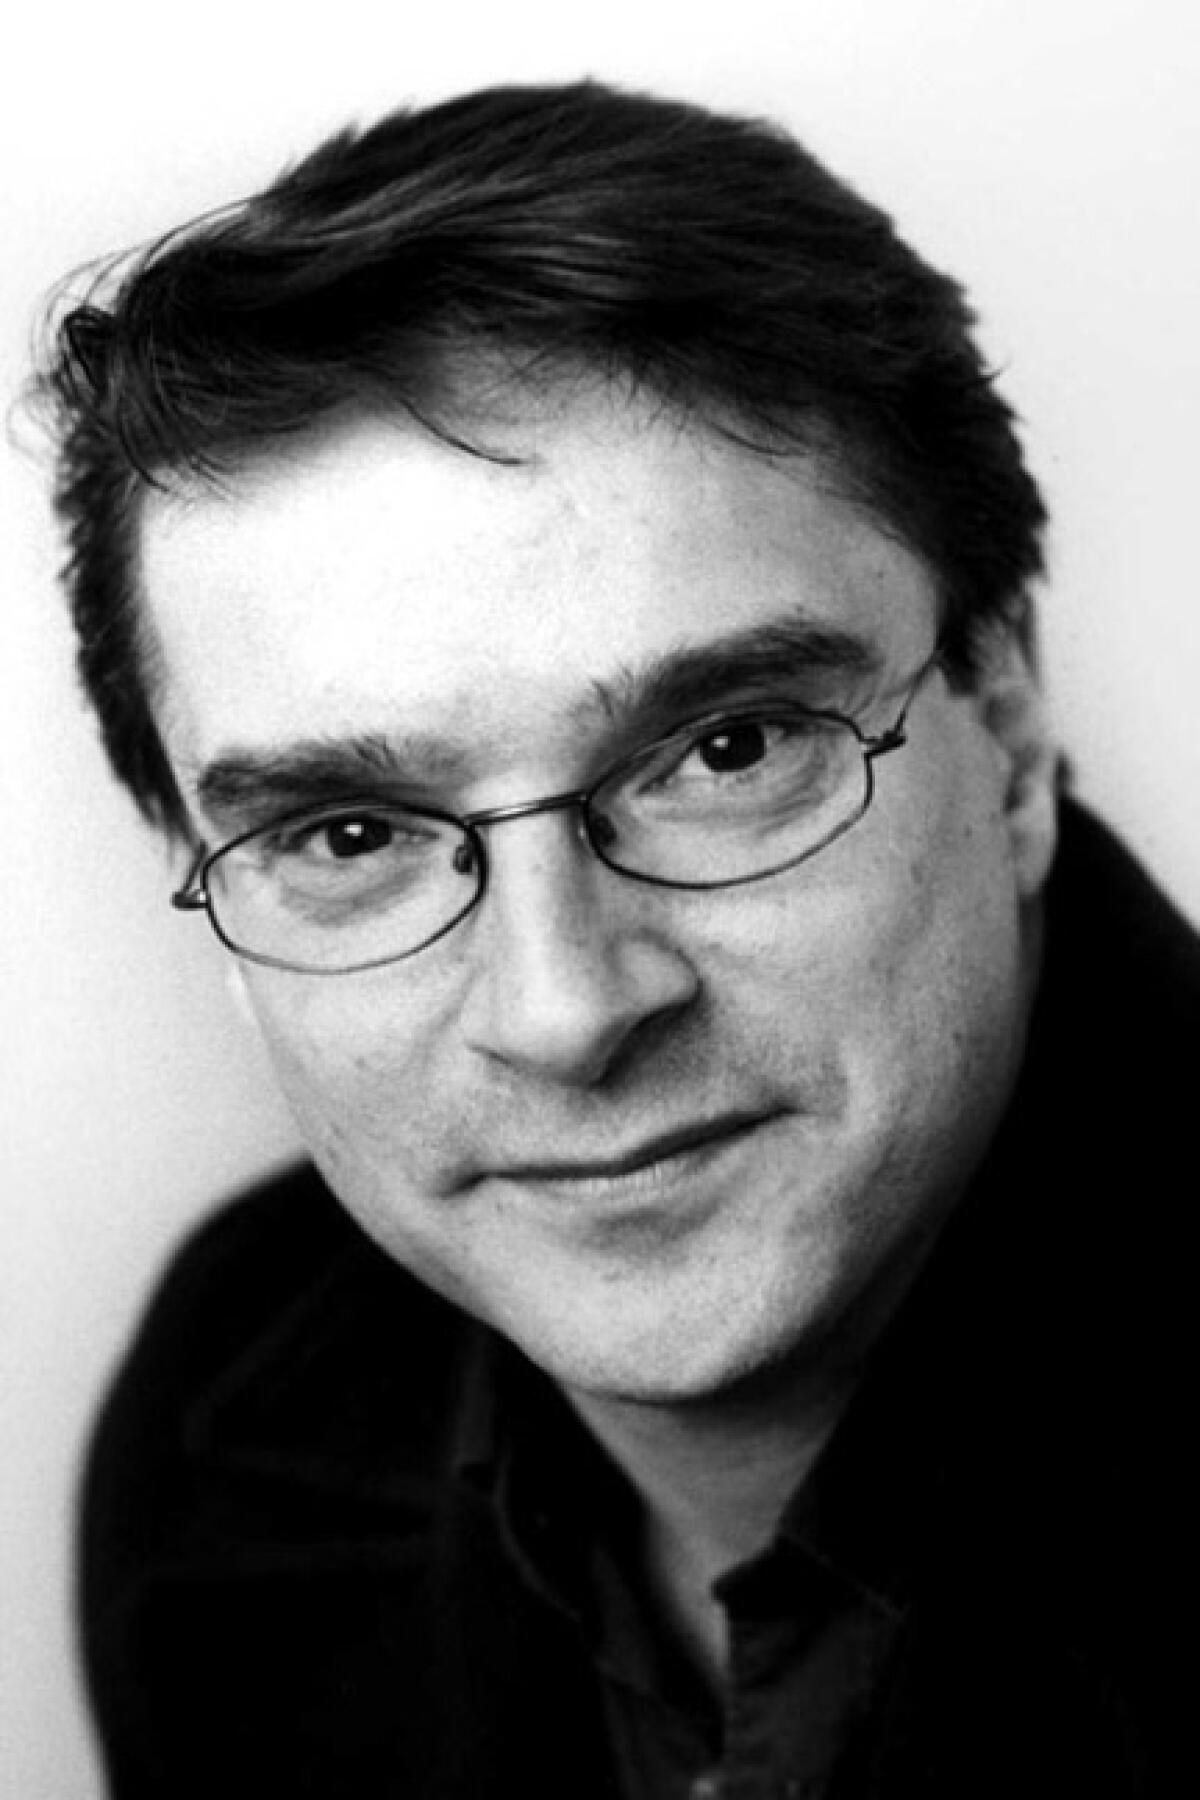 A black-and-white portrait of a man with dark hair wearing glasses.